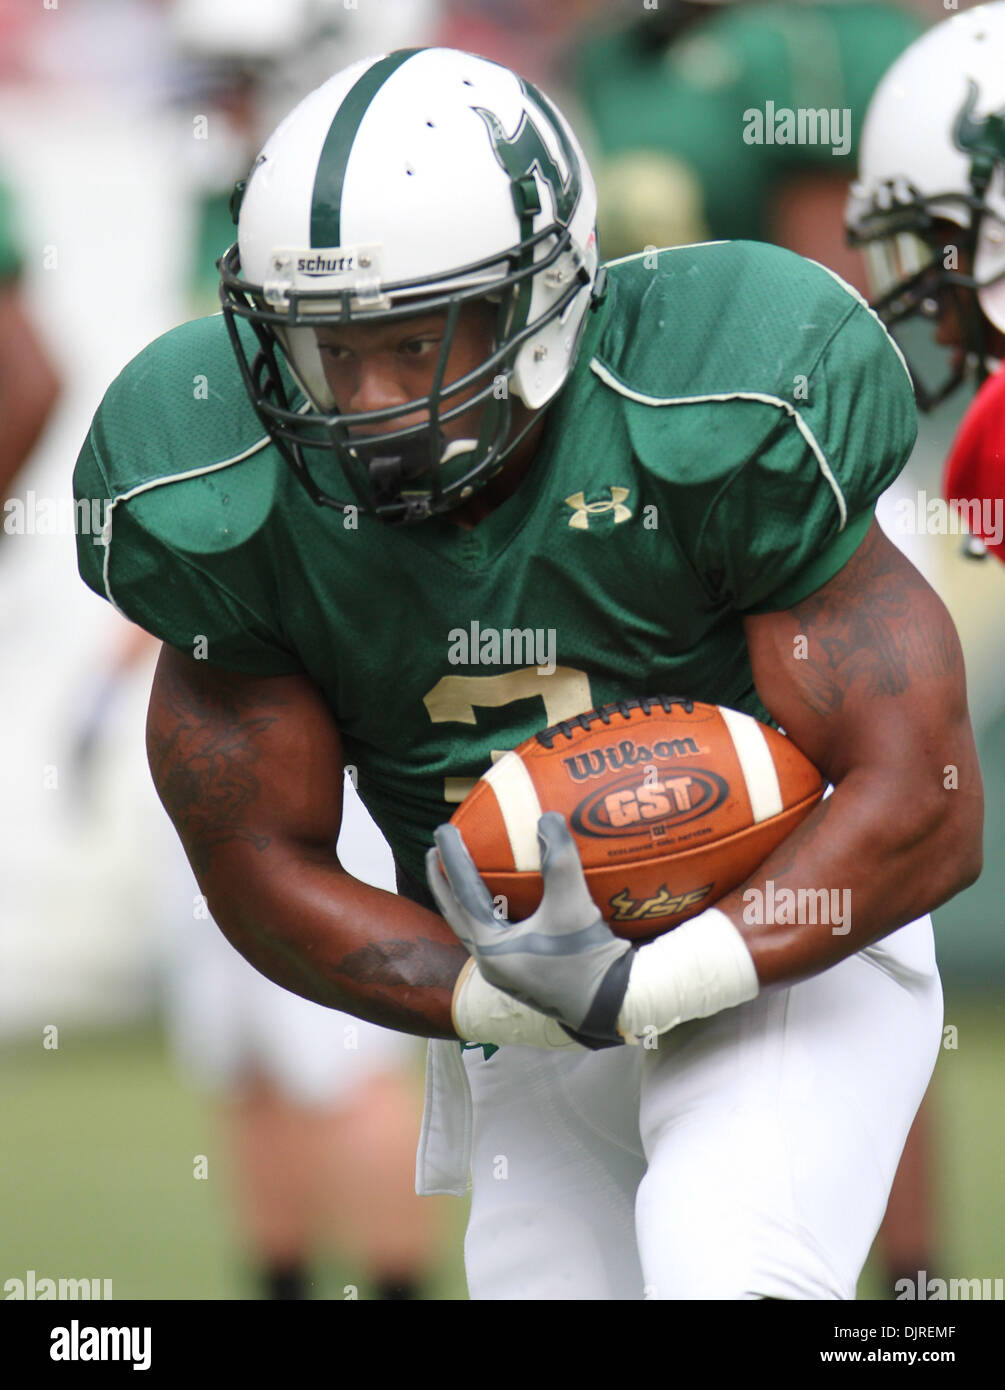 Apr. 17, 2010 - Tampa, Florida, U.S - 17 April 2010: USF running back Moise Plancher (#3) warms up prior to the game. Team South Florida defeated Team Bulls  52-31 as USF played their spring football game at Raymond James Stadium in Tampa, Florida (Credit Image: © Margaret Bowles/Southcreek Global/ZUMApress.com) Stock Photo